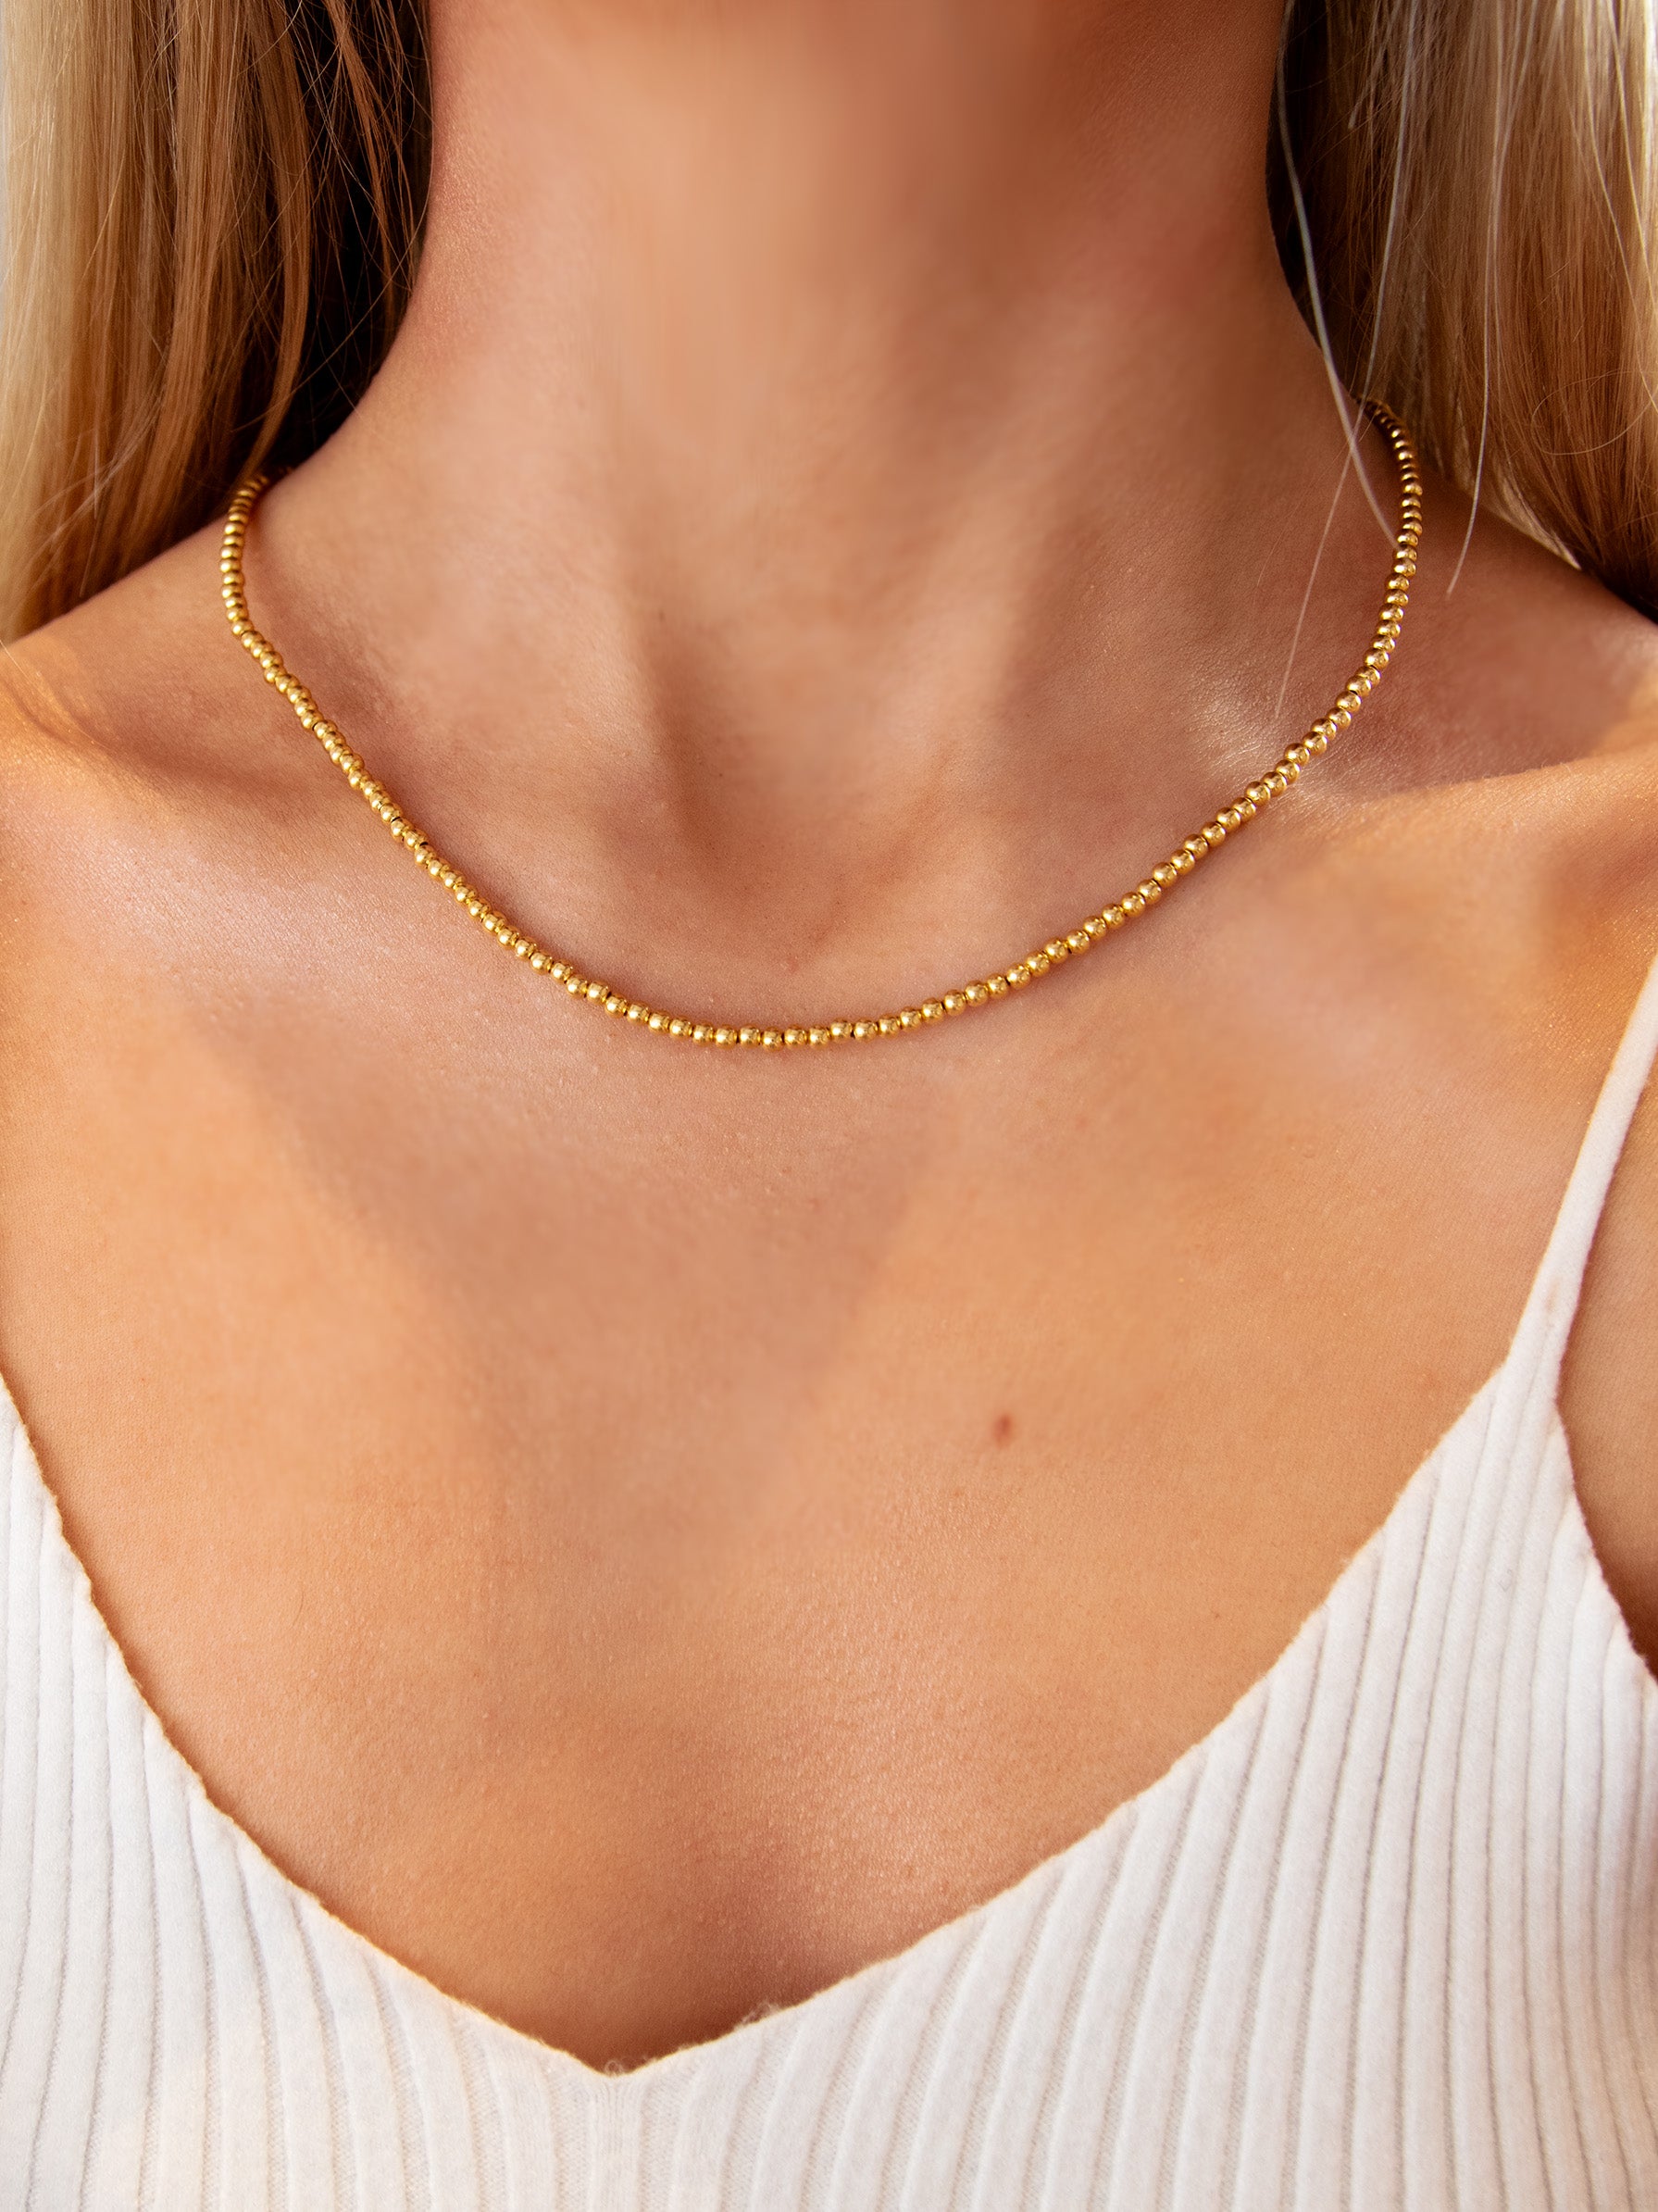 Gold Ball Choker or Necklace With Round Beads